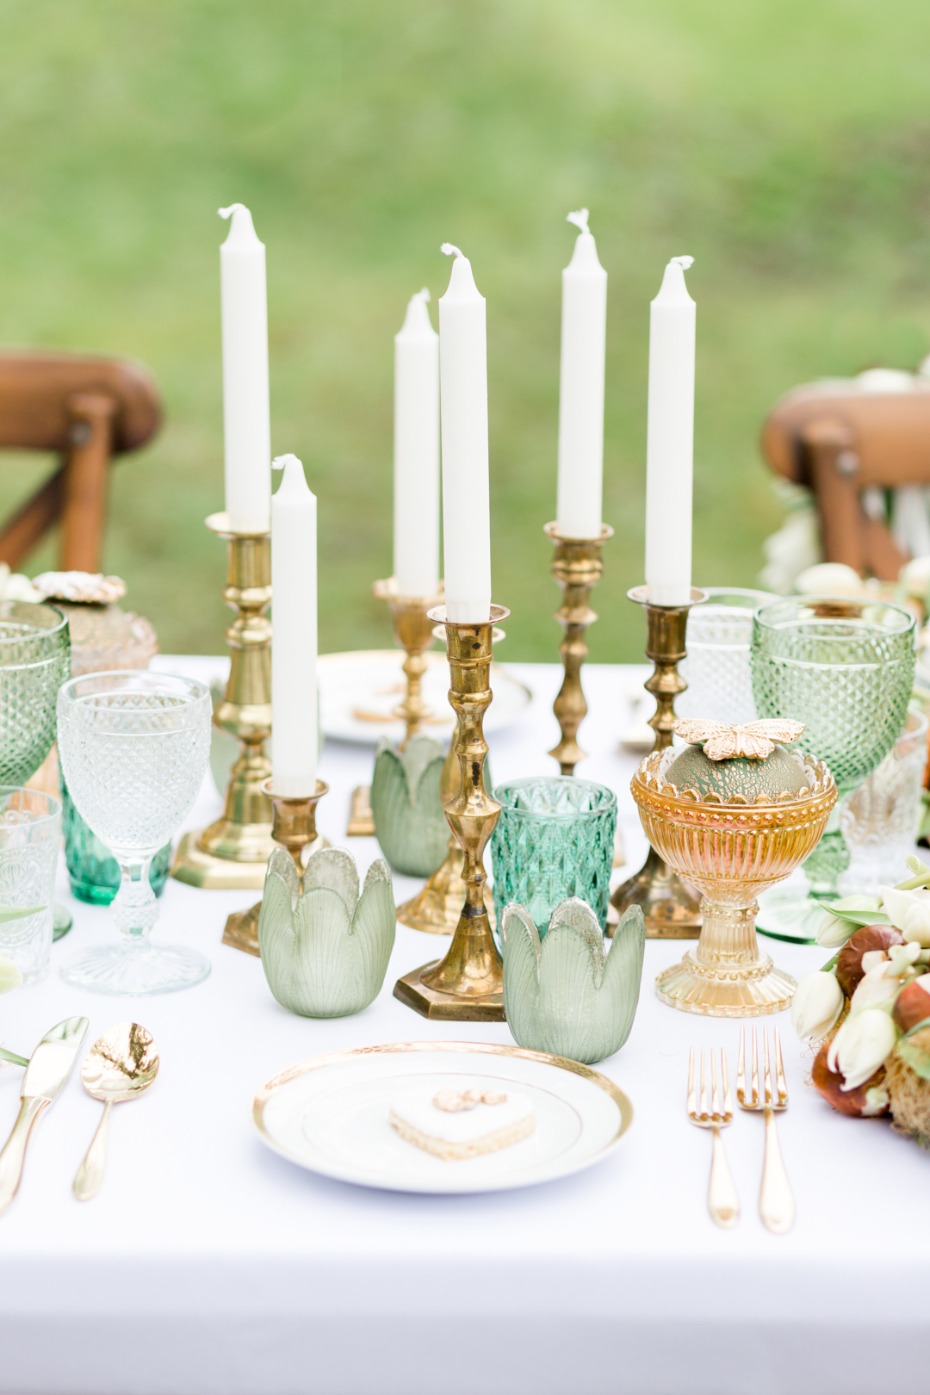 Brass candle sticks and colored glassware